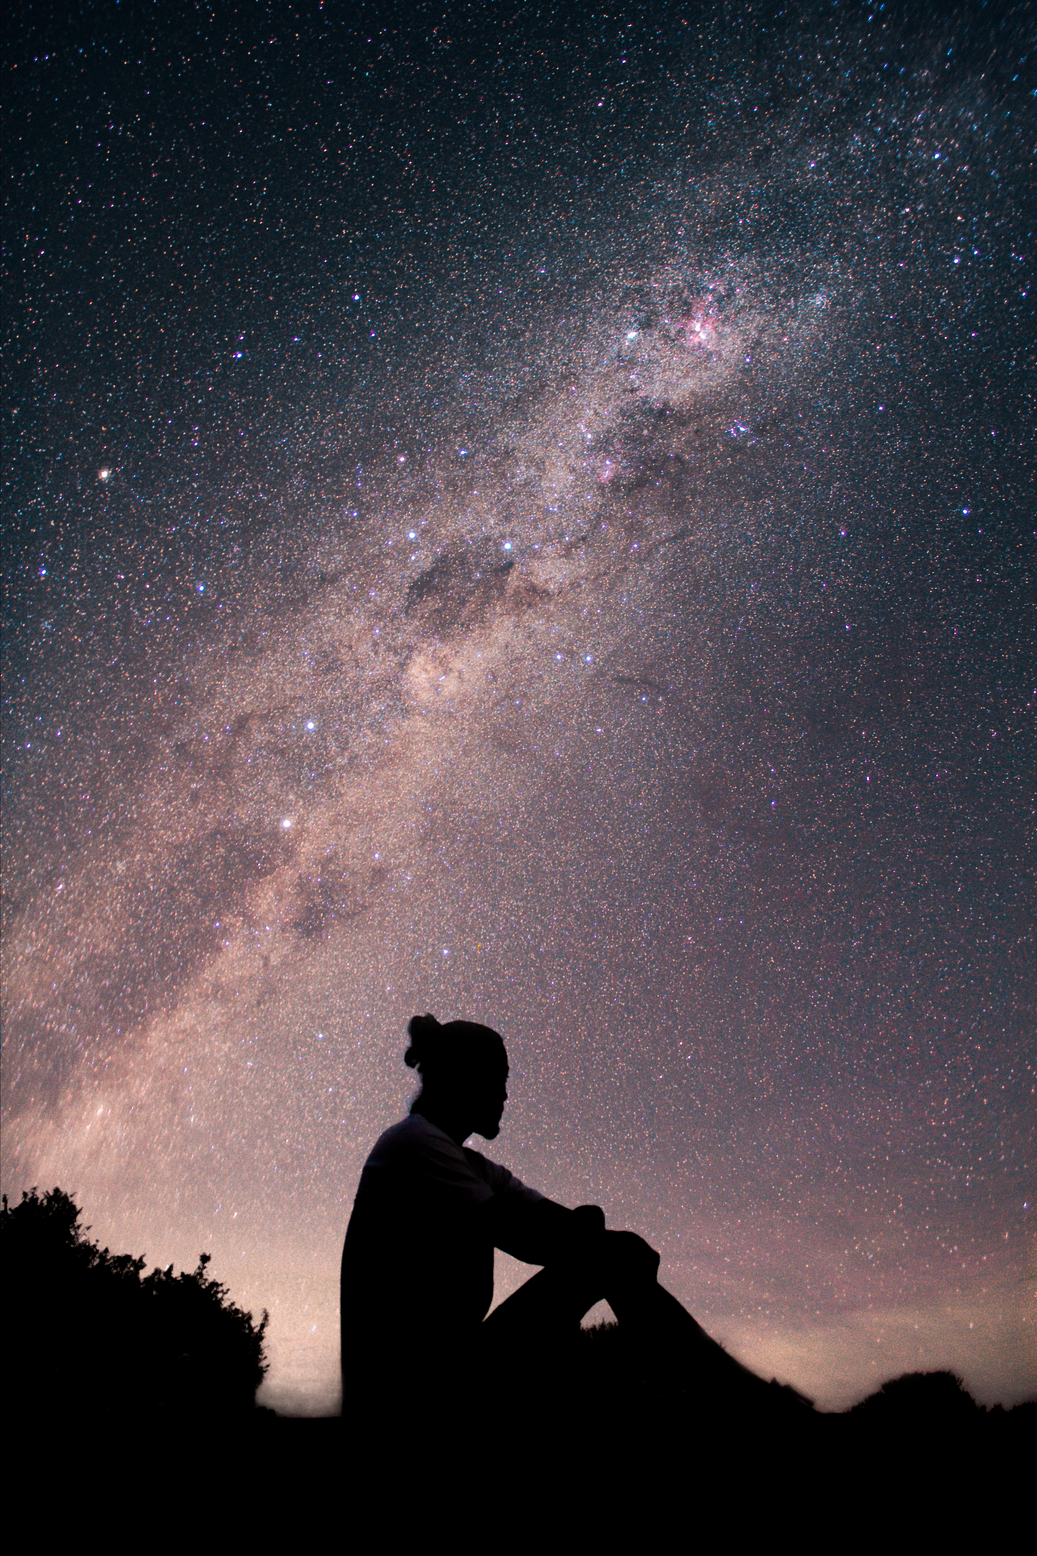 Silhouette of Man Standing Under Starry Night